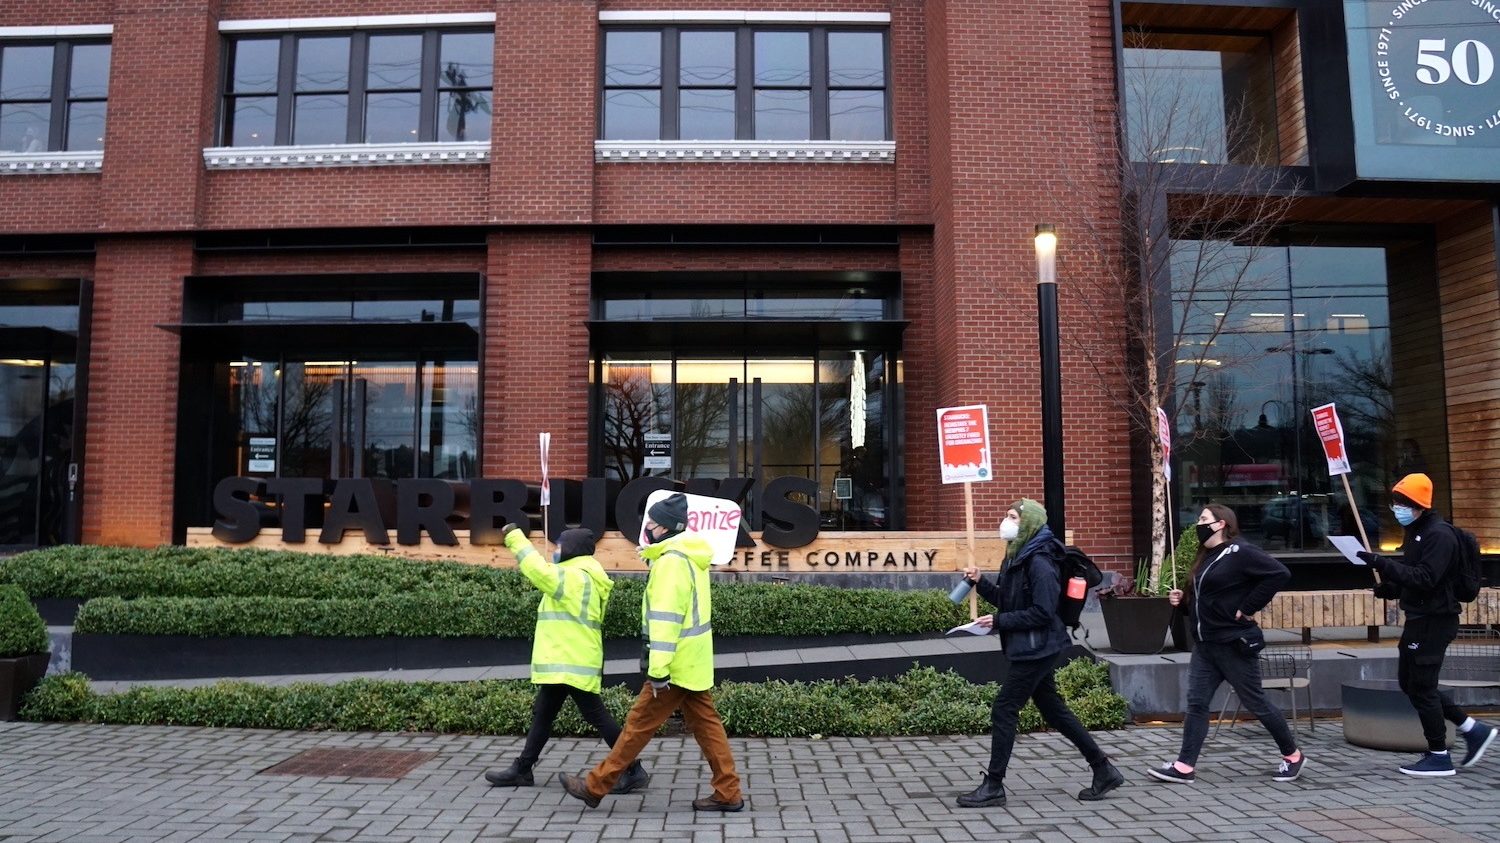 Protesters outside the Starbucks's Seattle headquarters. February 2022